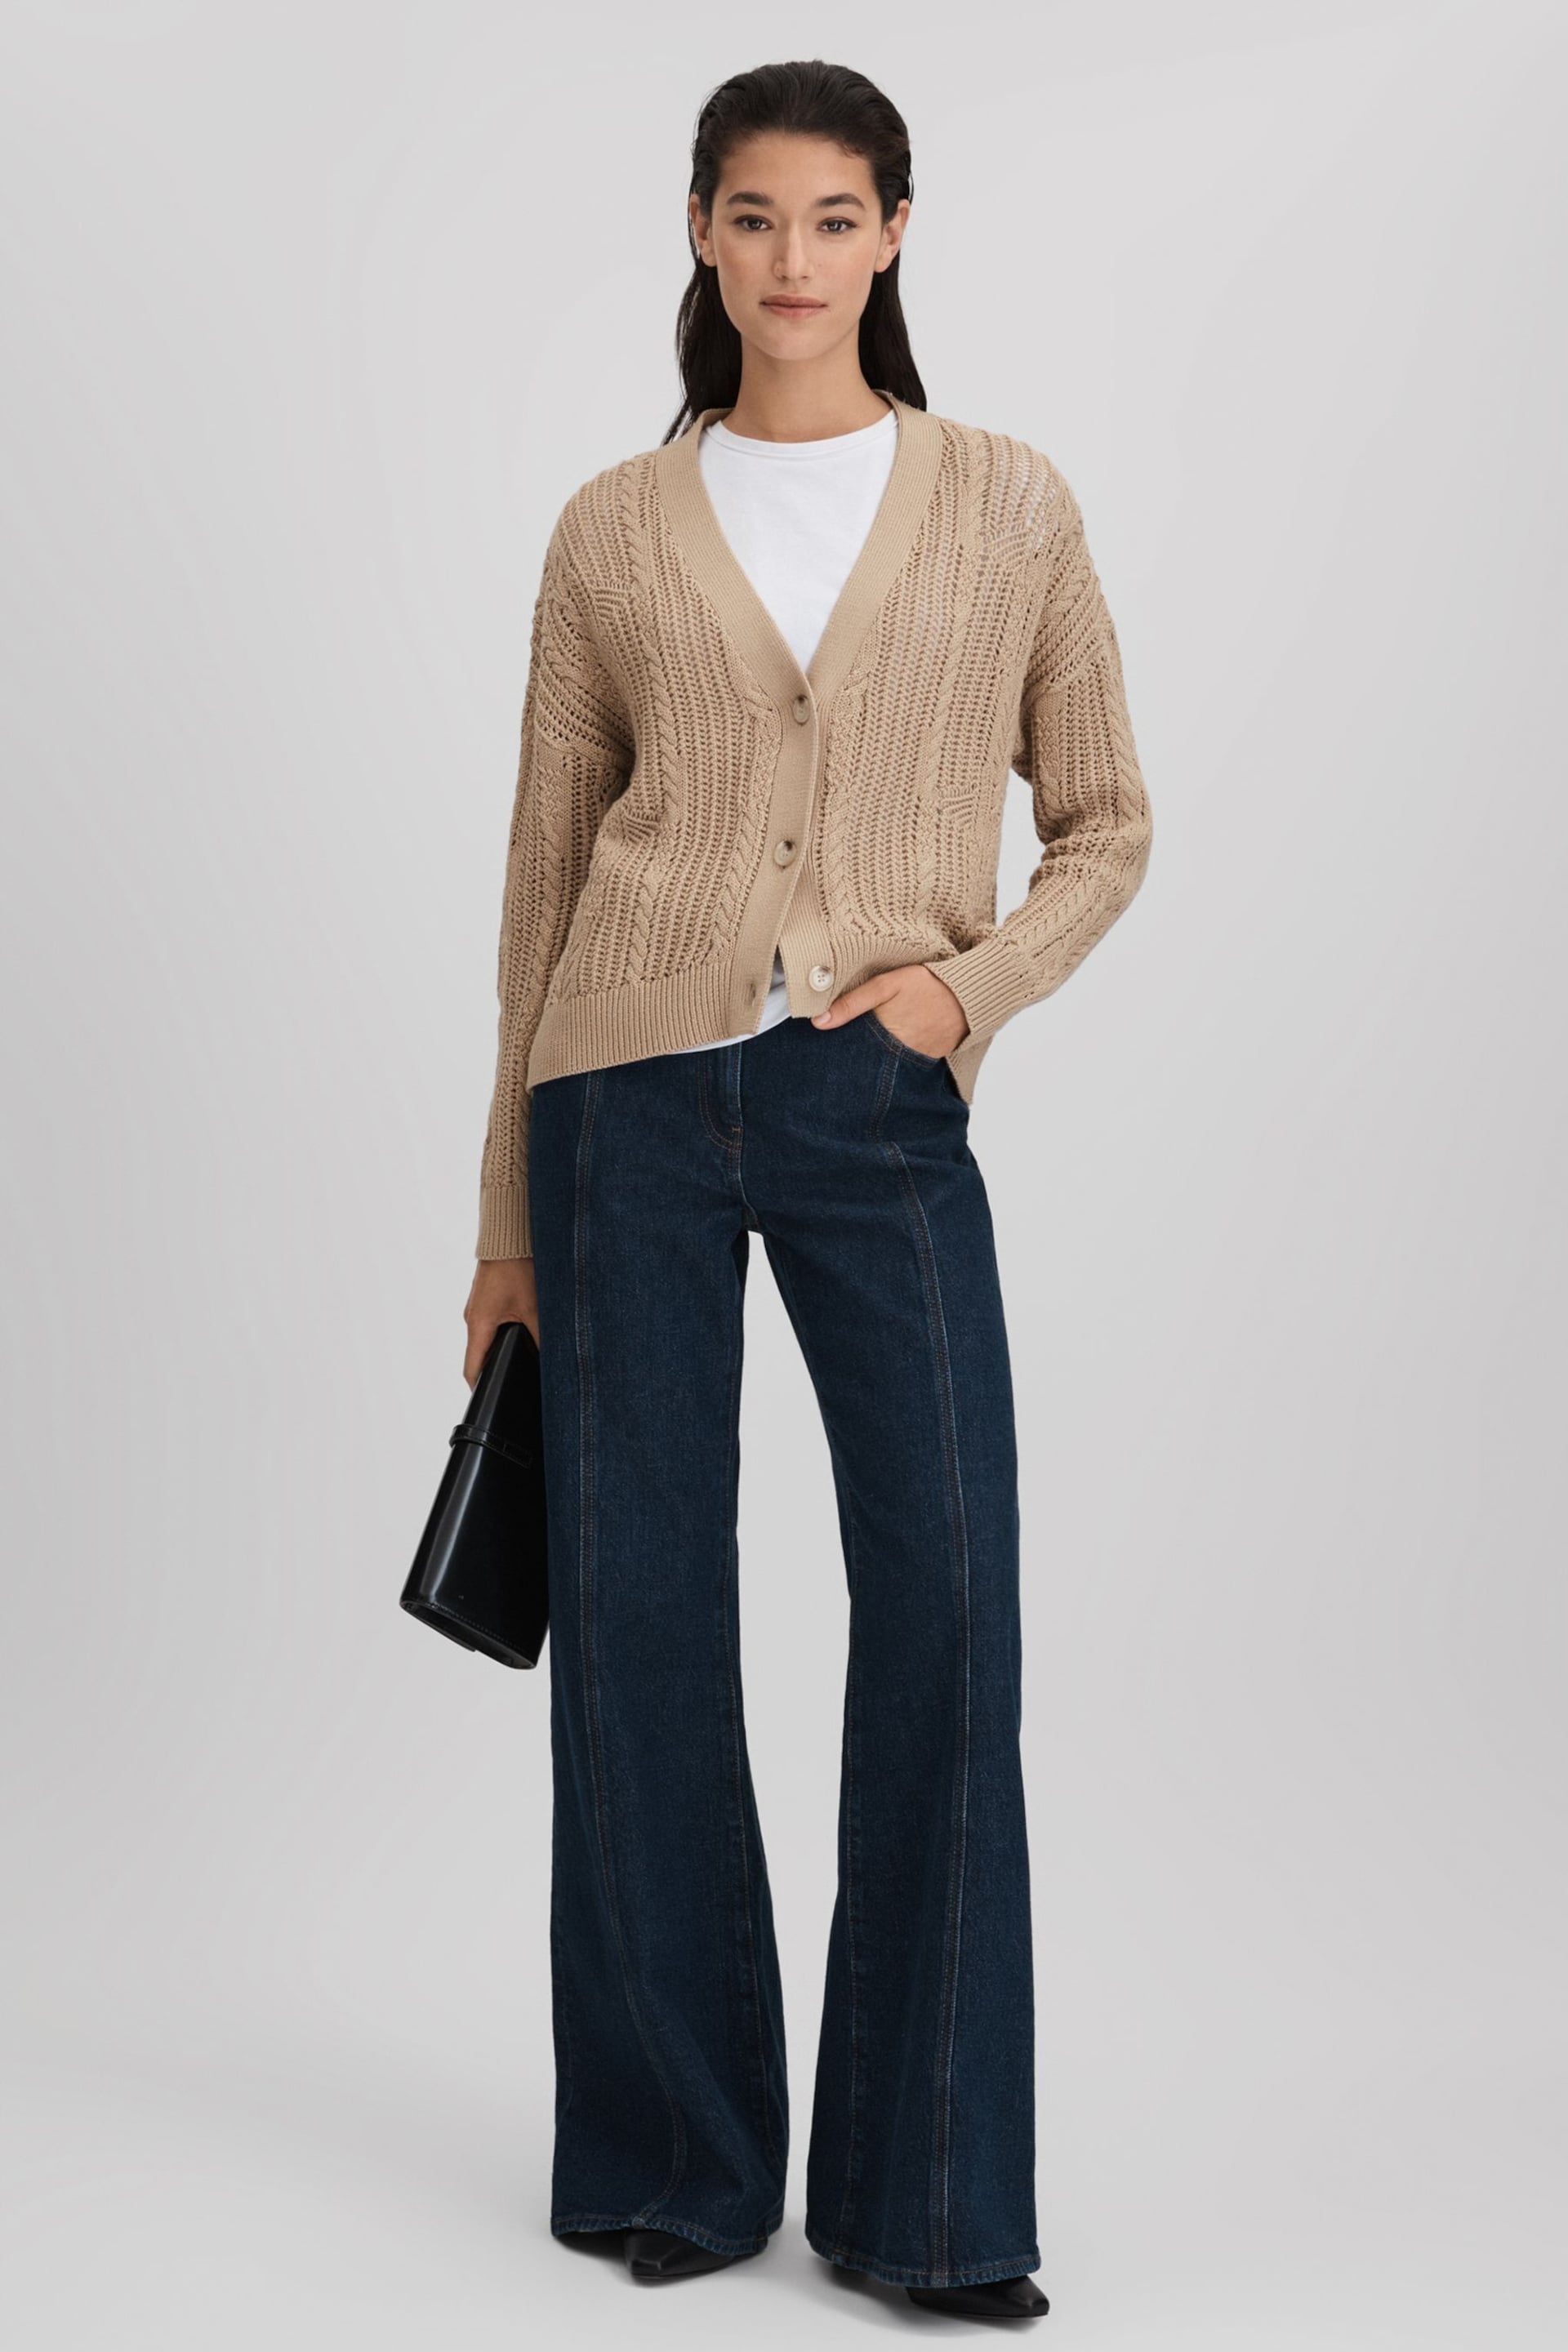 Reiss Neutral Tiffany Cotton Blend Open Stitch Cardigan - Image 1 of 6